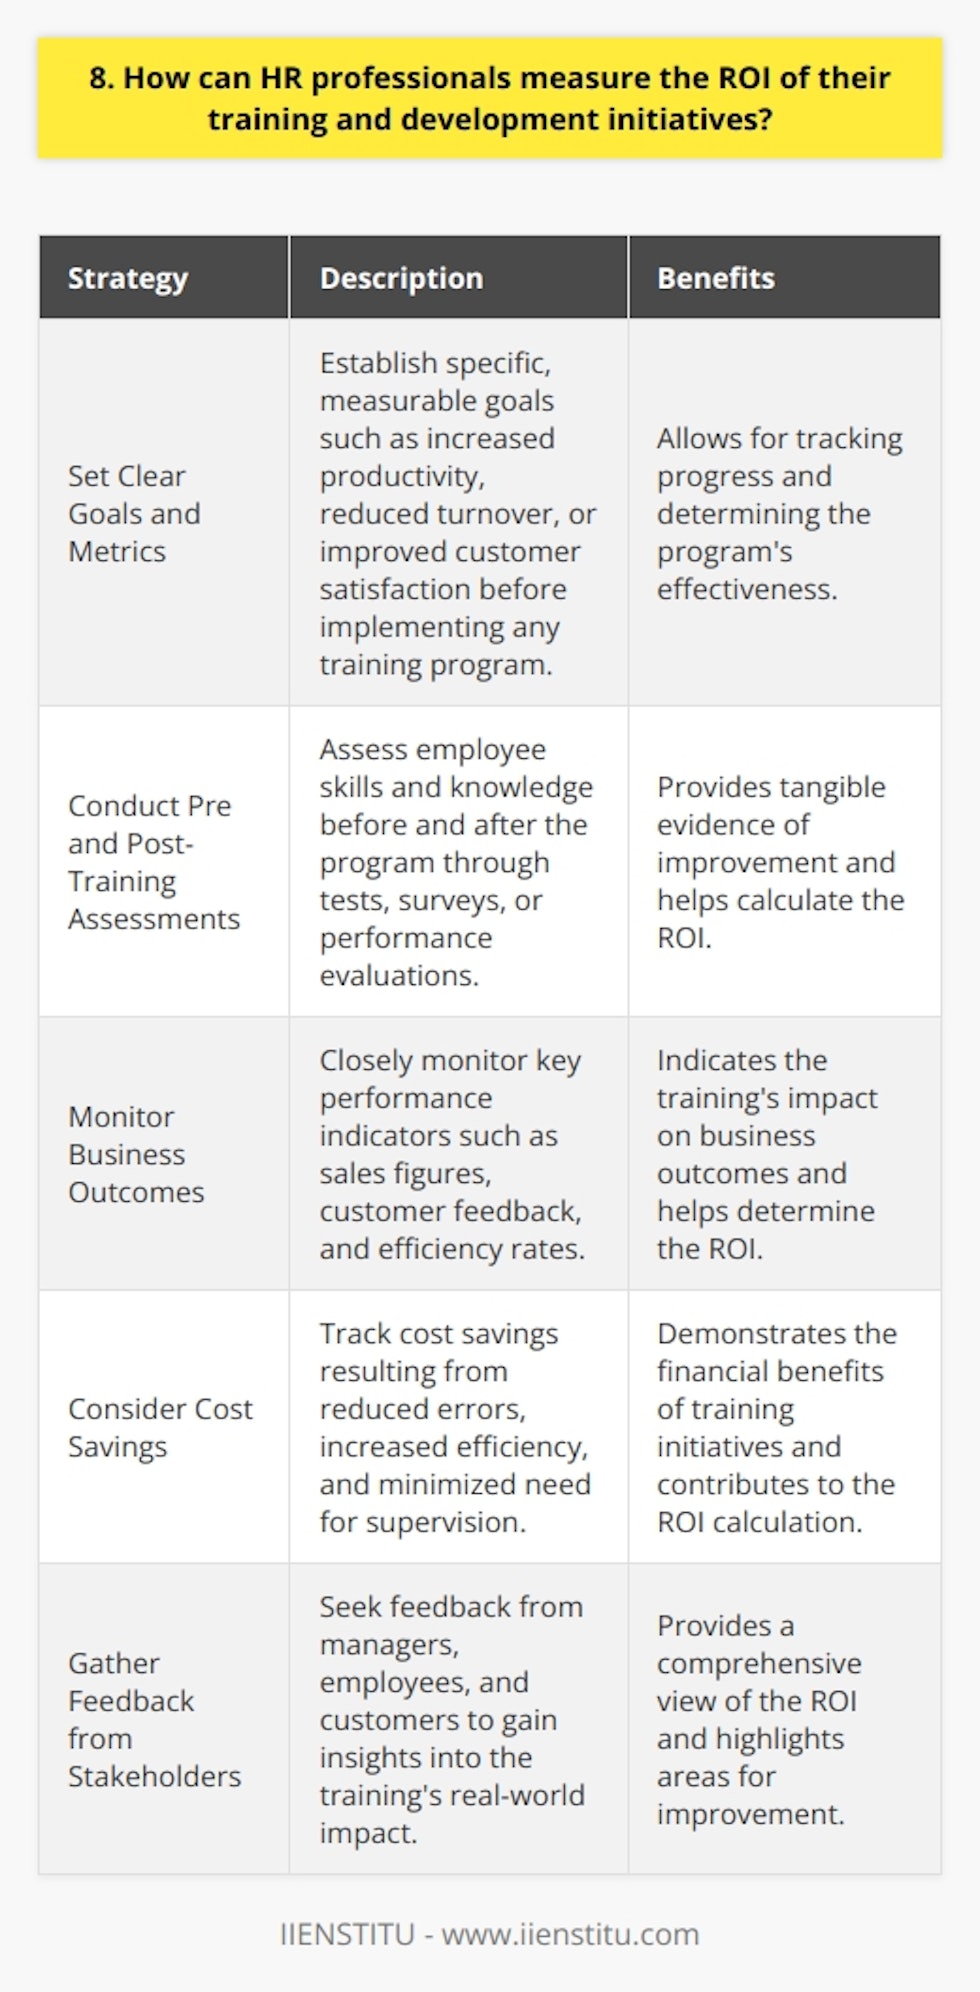 As an HR professional, measuring the ROI of training and development initiatives is crucial. Here are some strategies I would employ: Set Clear Goals and Metrics Before implementing any training program, I would establish specific, measurable goals. These could include increased productivity, reduced turnover, or improved customer satisfaction. By defining clear metrics, I can track progress and determine the programs effectiveness. Conduct Pre and Post-Training Assessments To gauge the impact of training, I would assess employee skills and knowledge before and after the program. This could involve tests, surveys, or performance evaluations. Comparing the results would provide tangible evidence of improvement and help calculate the ROI. Monitor Business Outcomes Ultimately, the true measure of training success lies in its impact on business outcomes. I would closely monitor key performance indicators such as sales figures, customer feedback, and efficiency rates. If theres a notable improvement following the training, its a strong indicator of a positive ROI. Consider Cost Savings Training initiatives often lead to cost savings by reducing errors, increasing efficiency, and minimizing the need for supervision. I would track these savings and factor them into the ROI calculation. Even small improvements can add up to significant financial benefits over time. Gather Feedback from Stakeholders To get a well-rounded perspective, I would seek feedback from managers, employees, and even customers. Their insights can reveal the trainings real-world impact and highlight areas for improvement. This qualitative data complements the quantitative metrics and provides a more comprehensive view of the ROI. By employing these strategies, I believe HR professionals can effectively measure the ROI of their training and development initiatives. Its an ongoing process that requires careful planning, monitoring, and analysis, but the insights gained are invaluable for optimizing programs and demonstrating their worth to the organization.